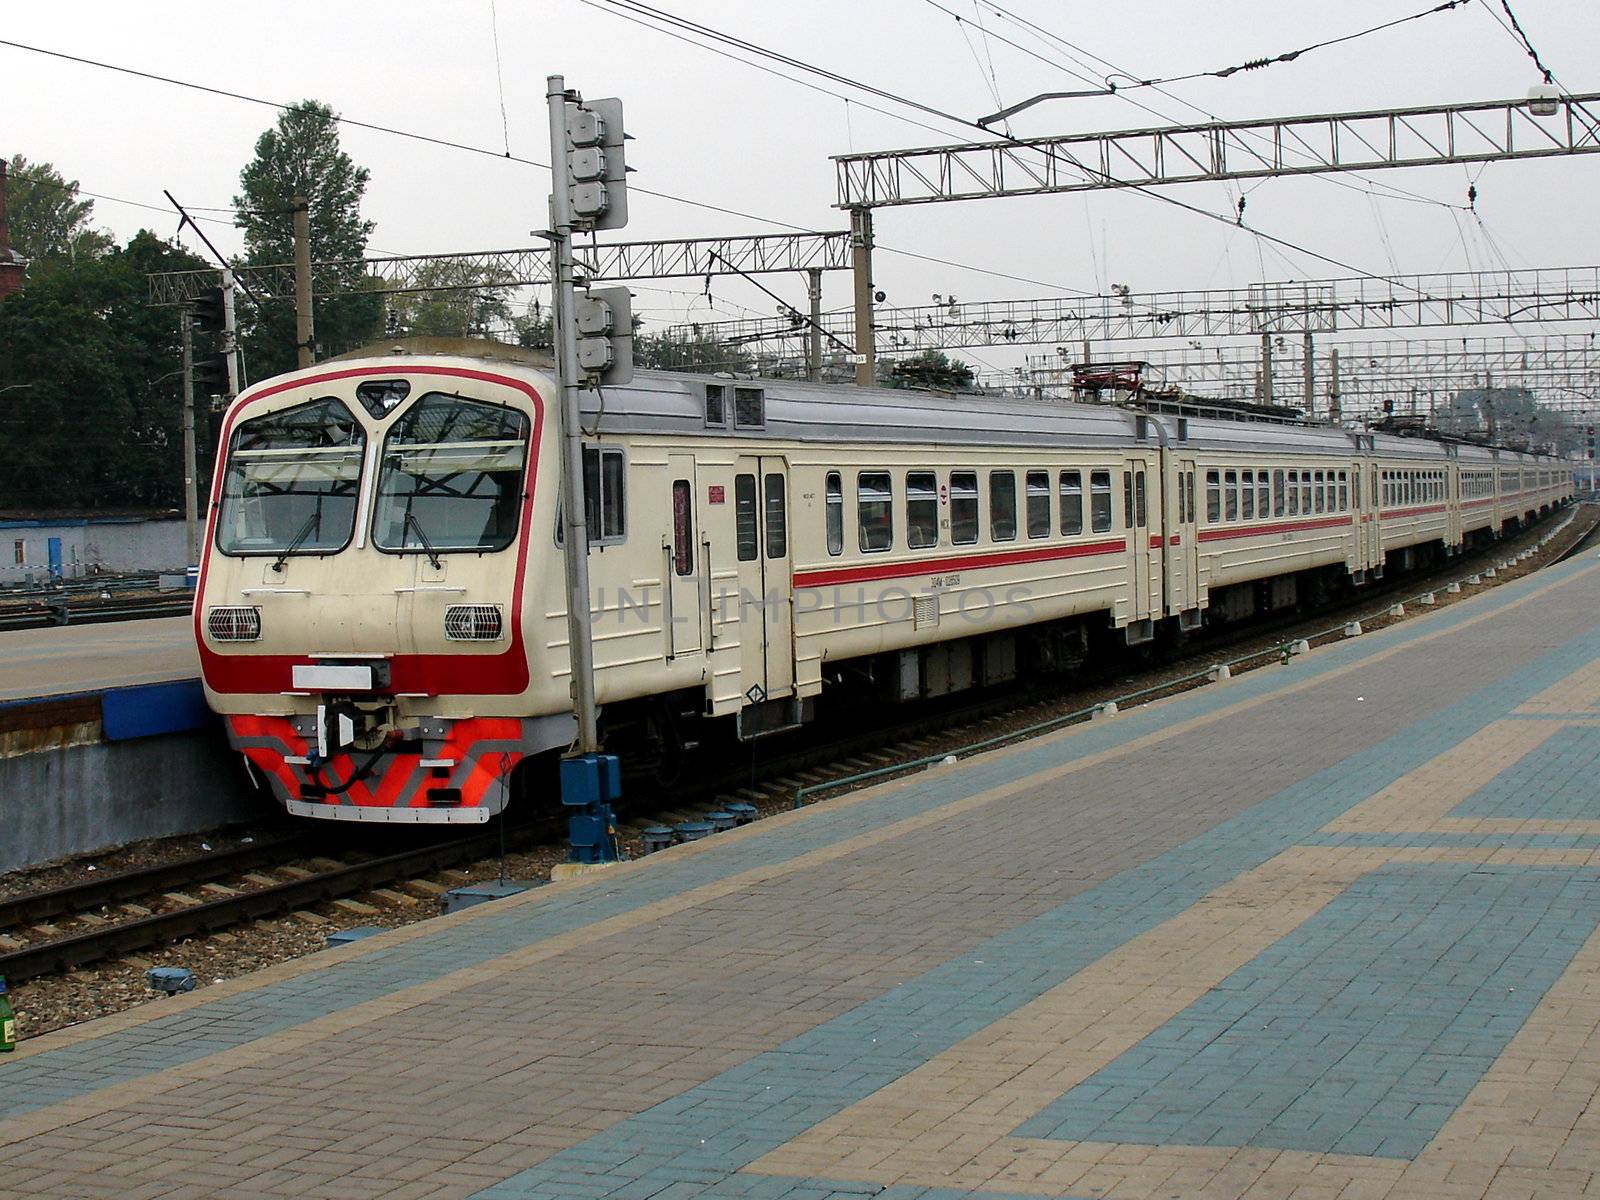 Rapid locomotive train with passengers at the station